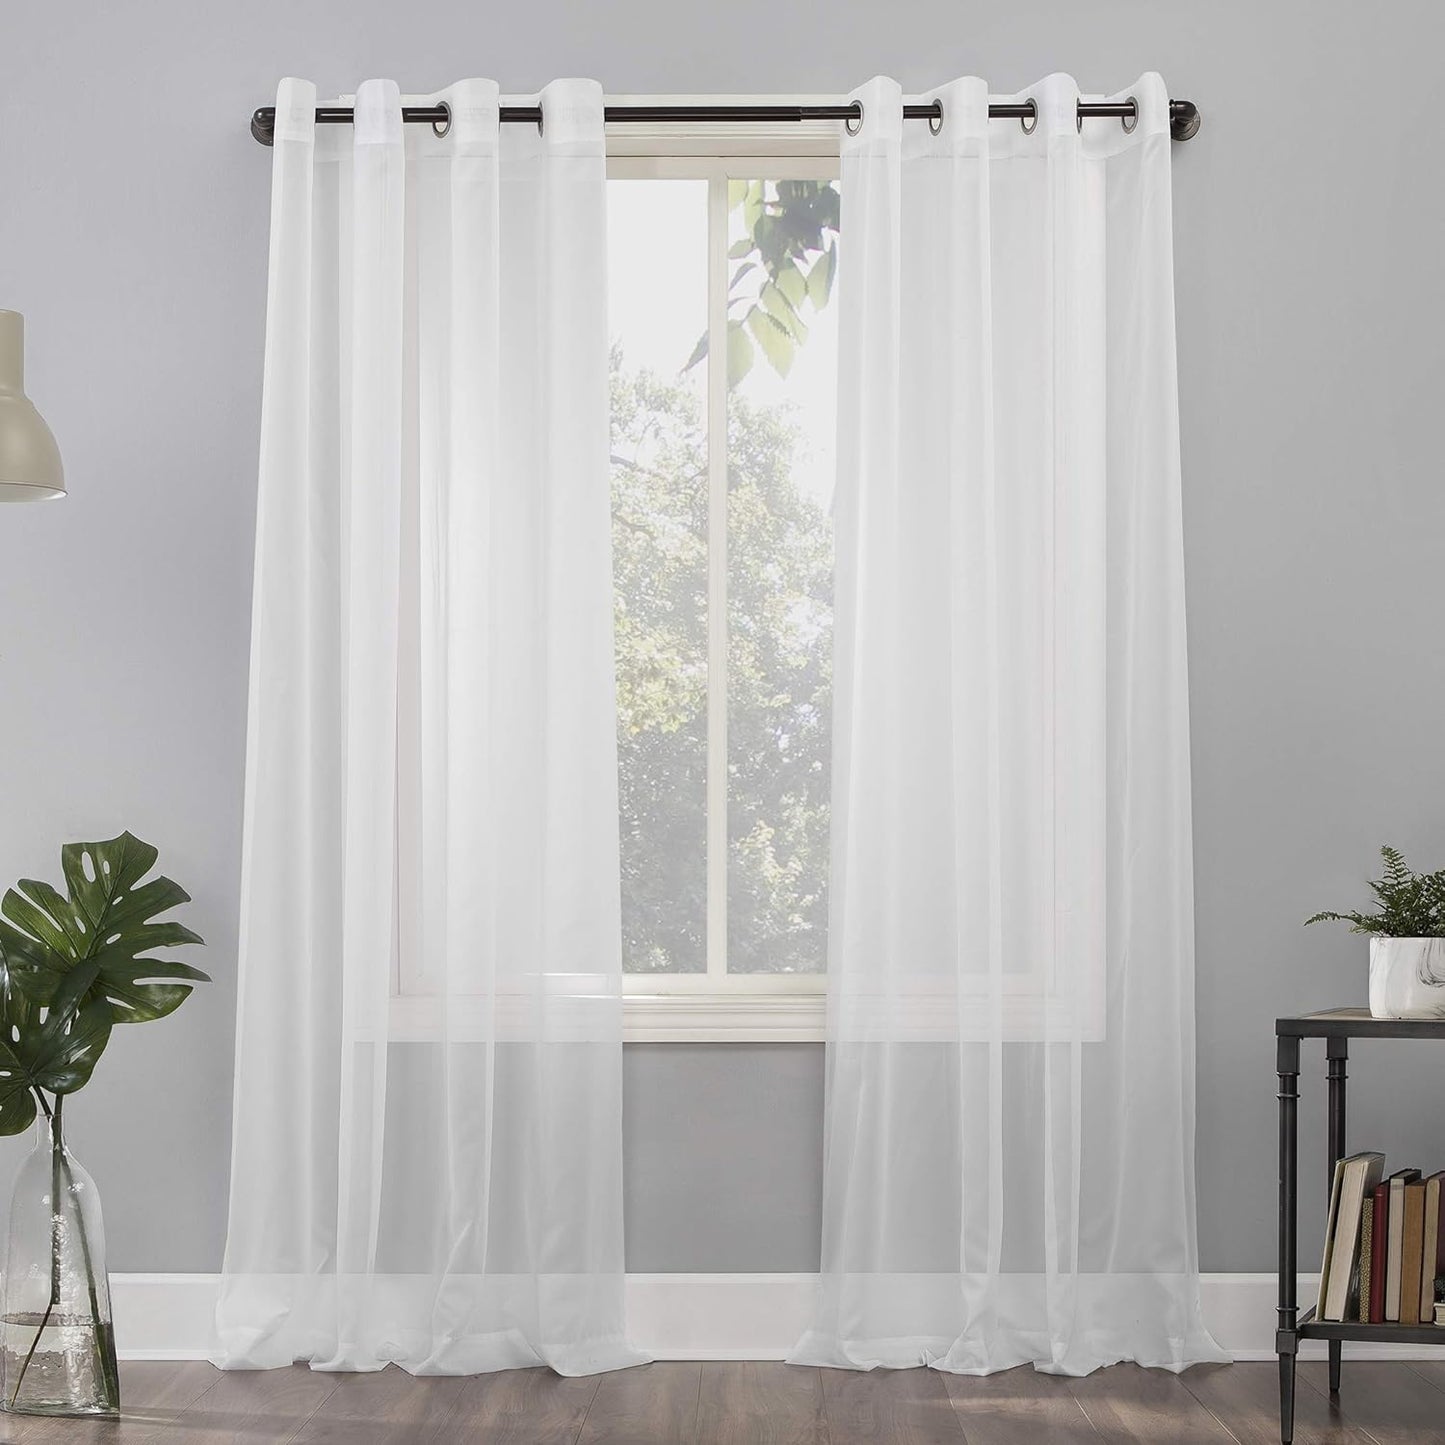 No. 918 Emily Sheer Voile Grommet Curtain Panel, 59" X 95", White  No. 918 White Curtain Panel 59" X 120"